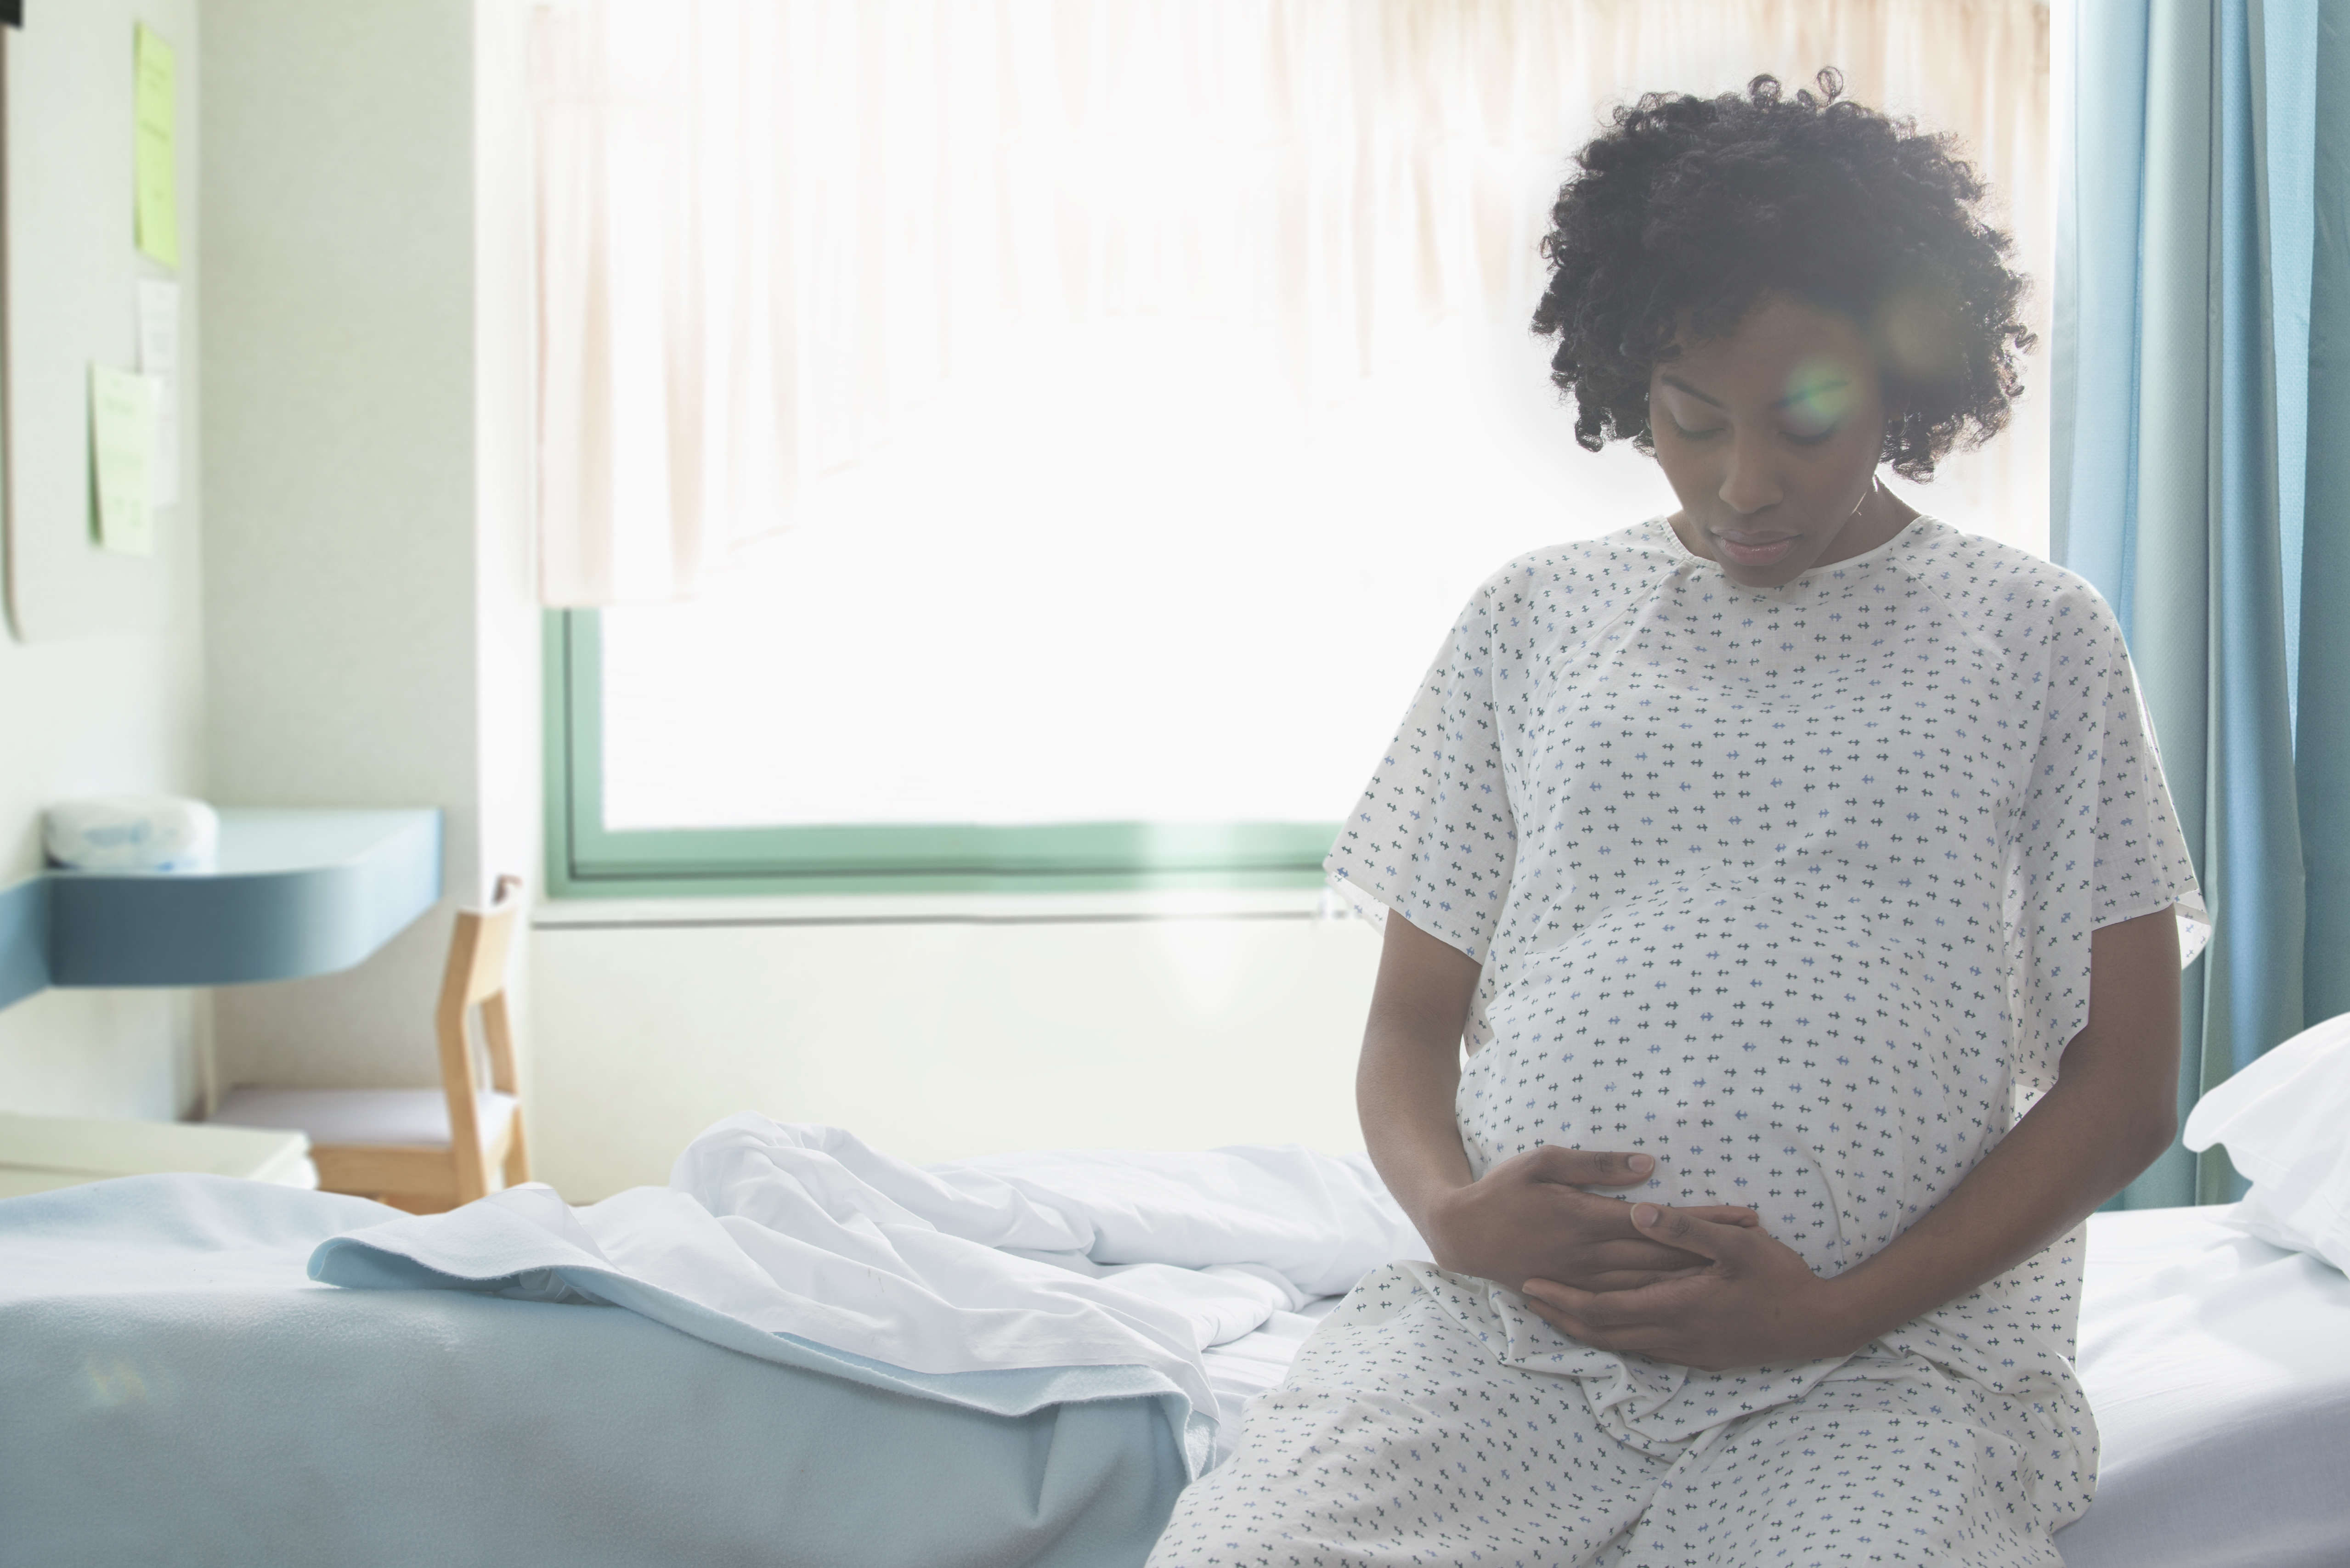 Pregnant woman sitting down on hospital bed with white gown on.